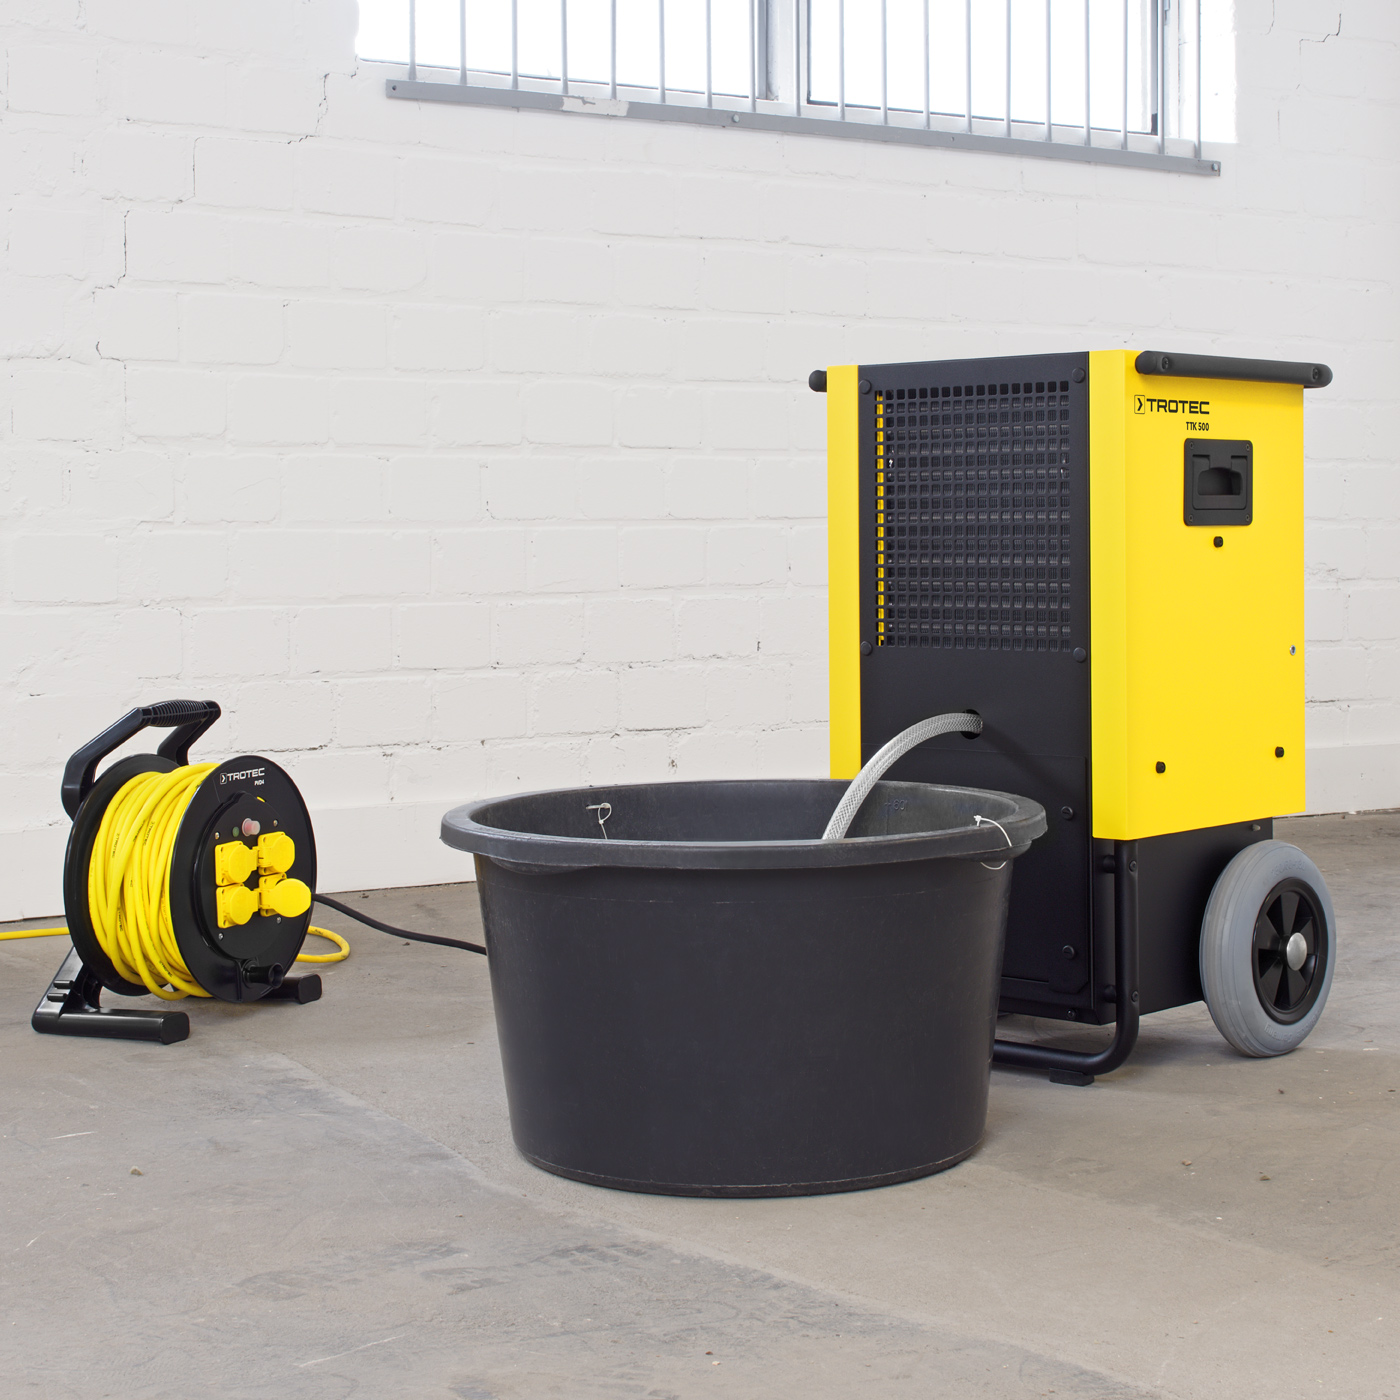 Professional construction drying with Trotec's TTK 500